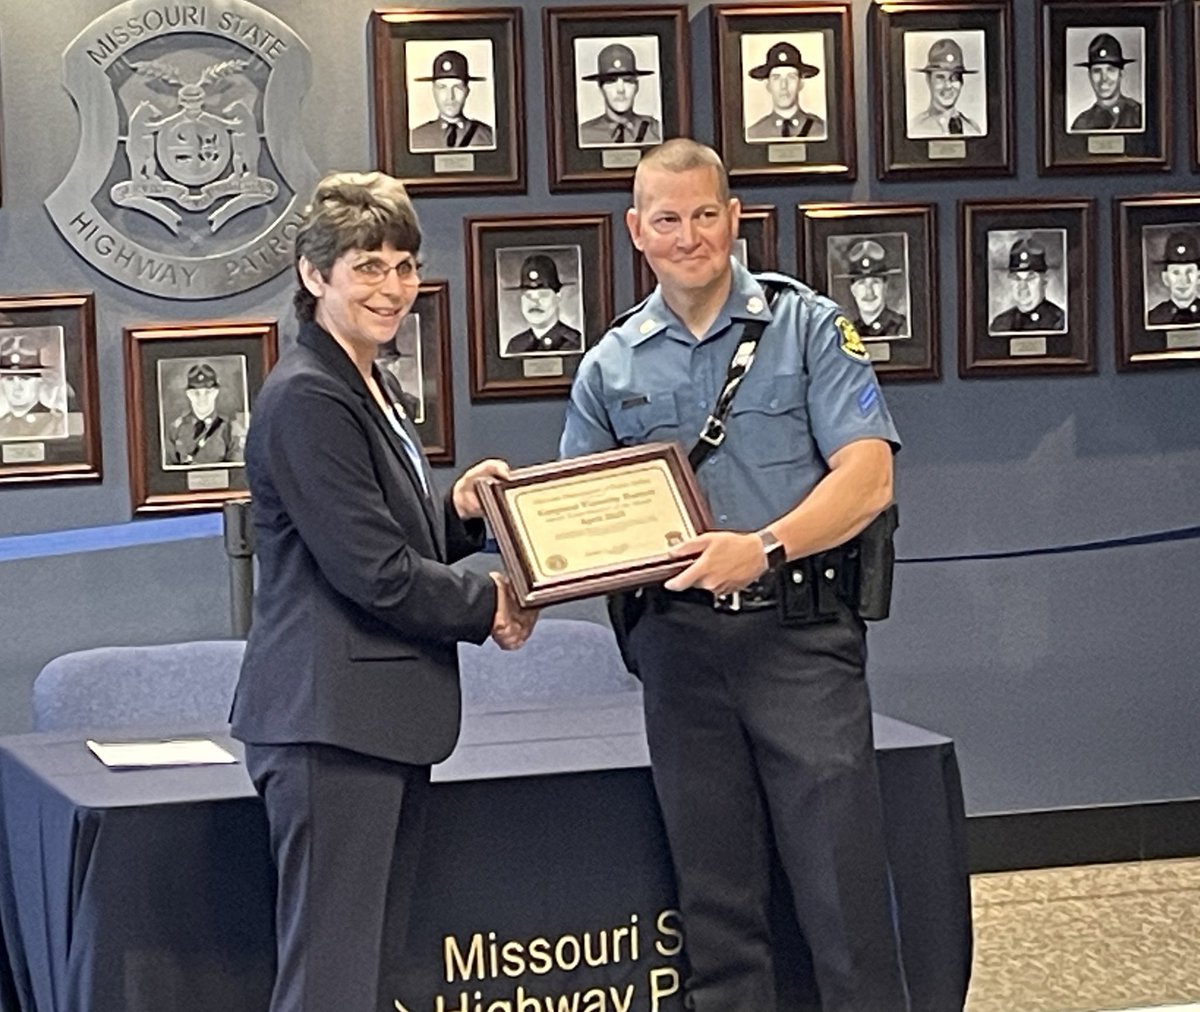 We honored @MSHPTrooperGHQ Cpl. Tim Barrett as Sworn Team Member of the Month for his vigilance fighting illegal drugs. A driver acted suspiciously during a traffic stop & consented to a search. Barrett found 170 lbs. of methamphetamine, 3 guns, cocaine and marijuana. Great work!